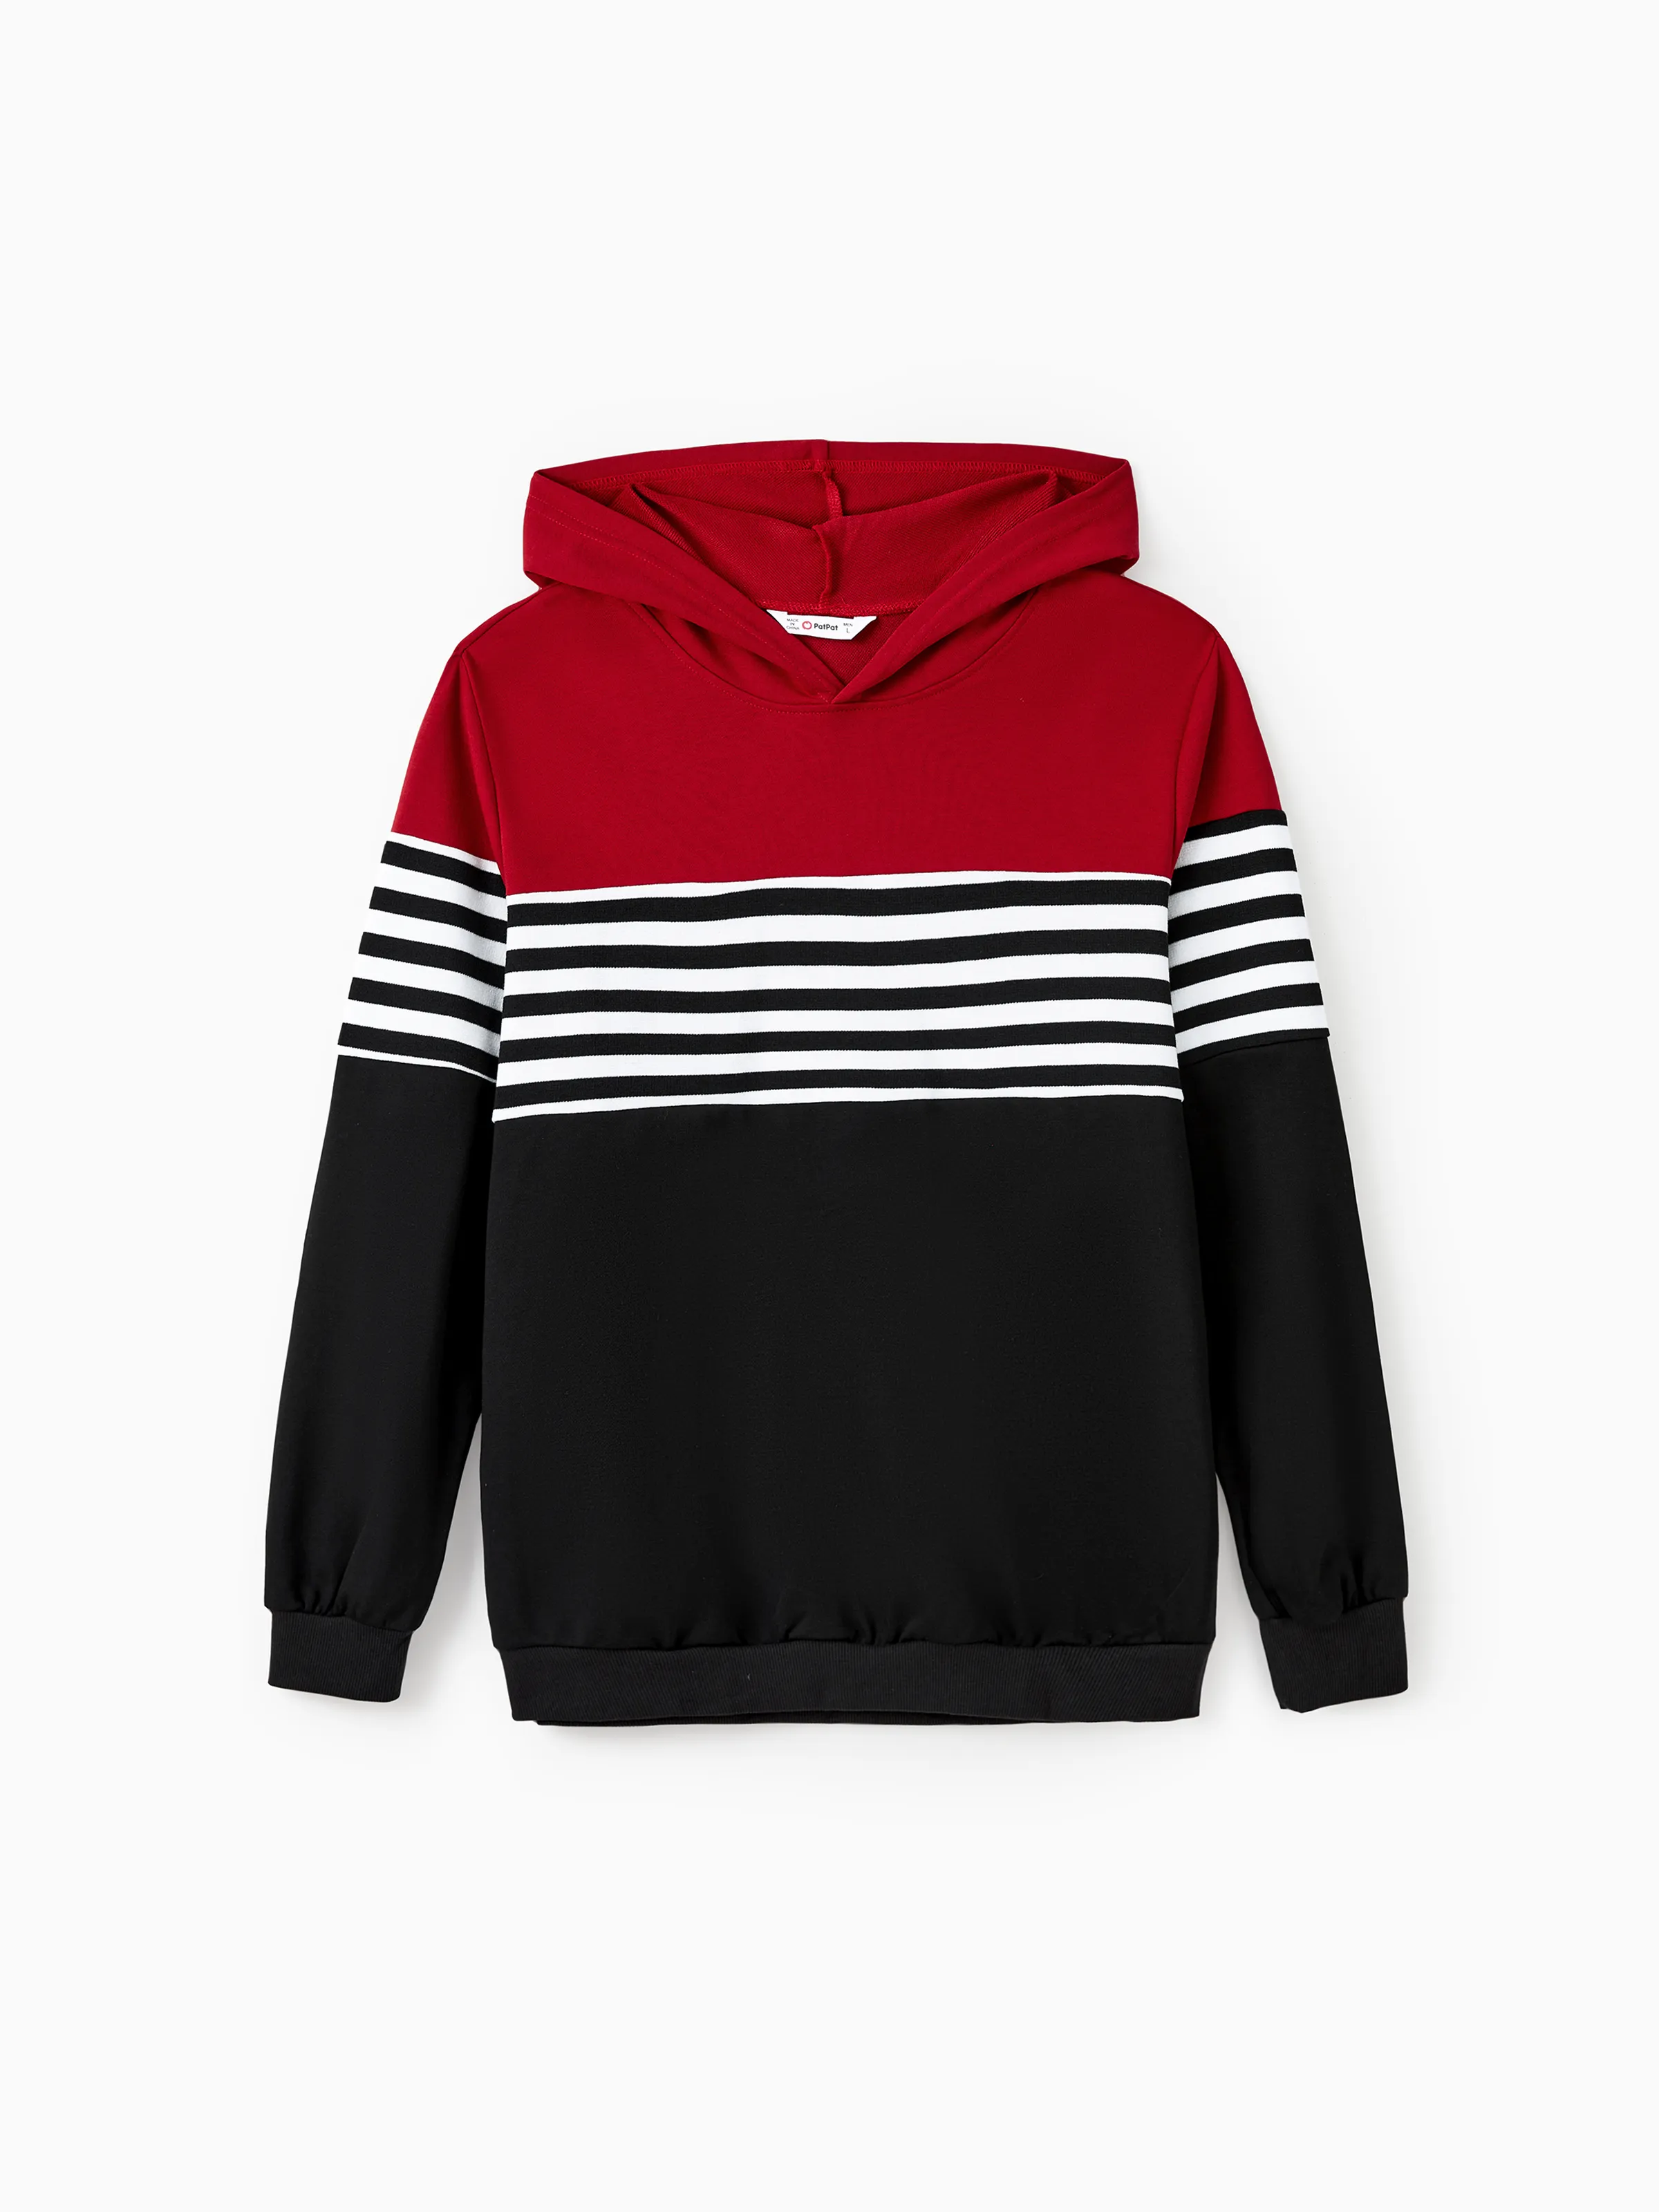 

Family Matching Casual Color-block Stripes Print Long Sleeve Hooded Tops